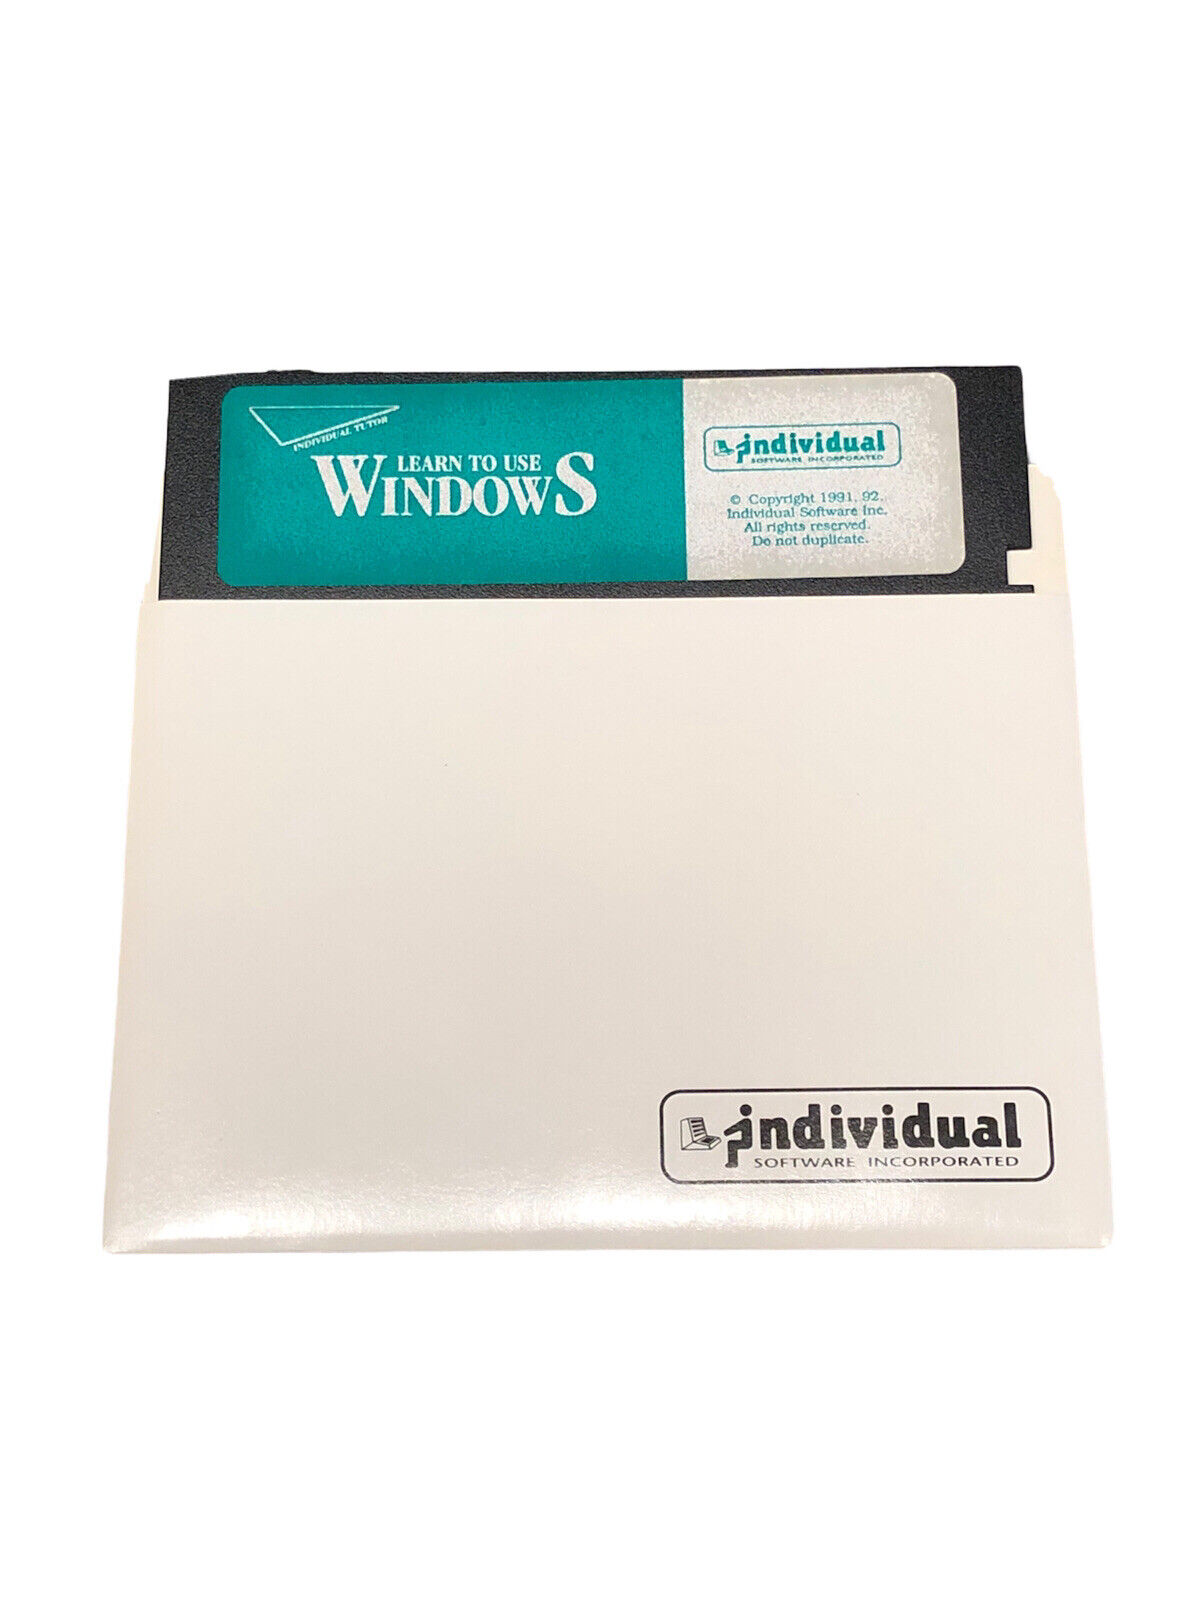 Learn To Use Windows 5.25” Floppy Disk By Individual Software 1992 Vintage